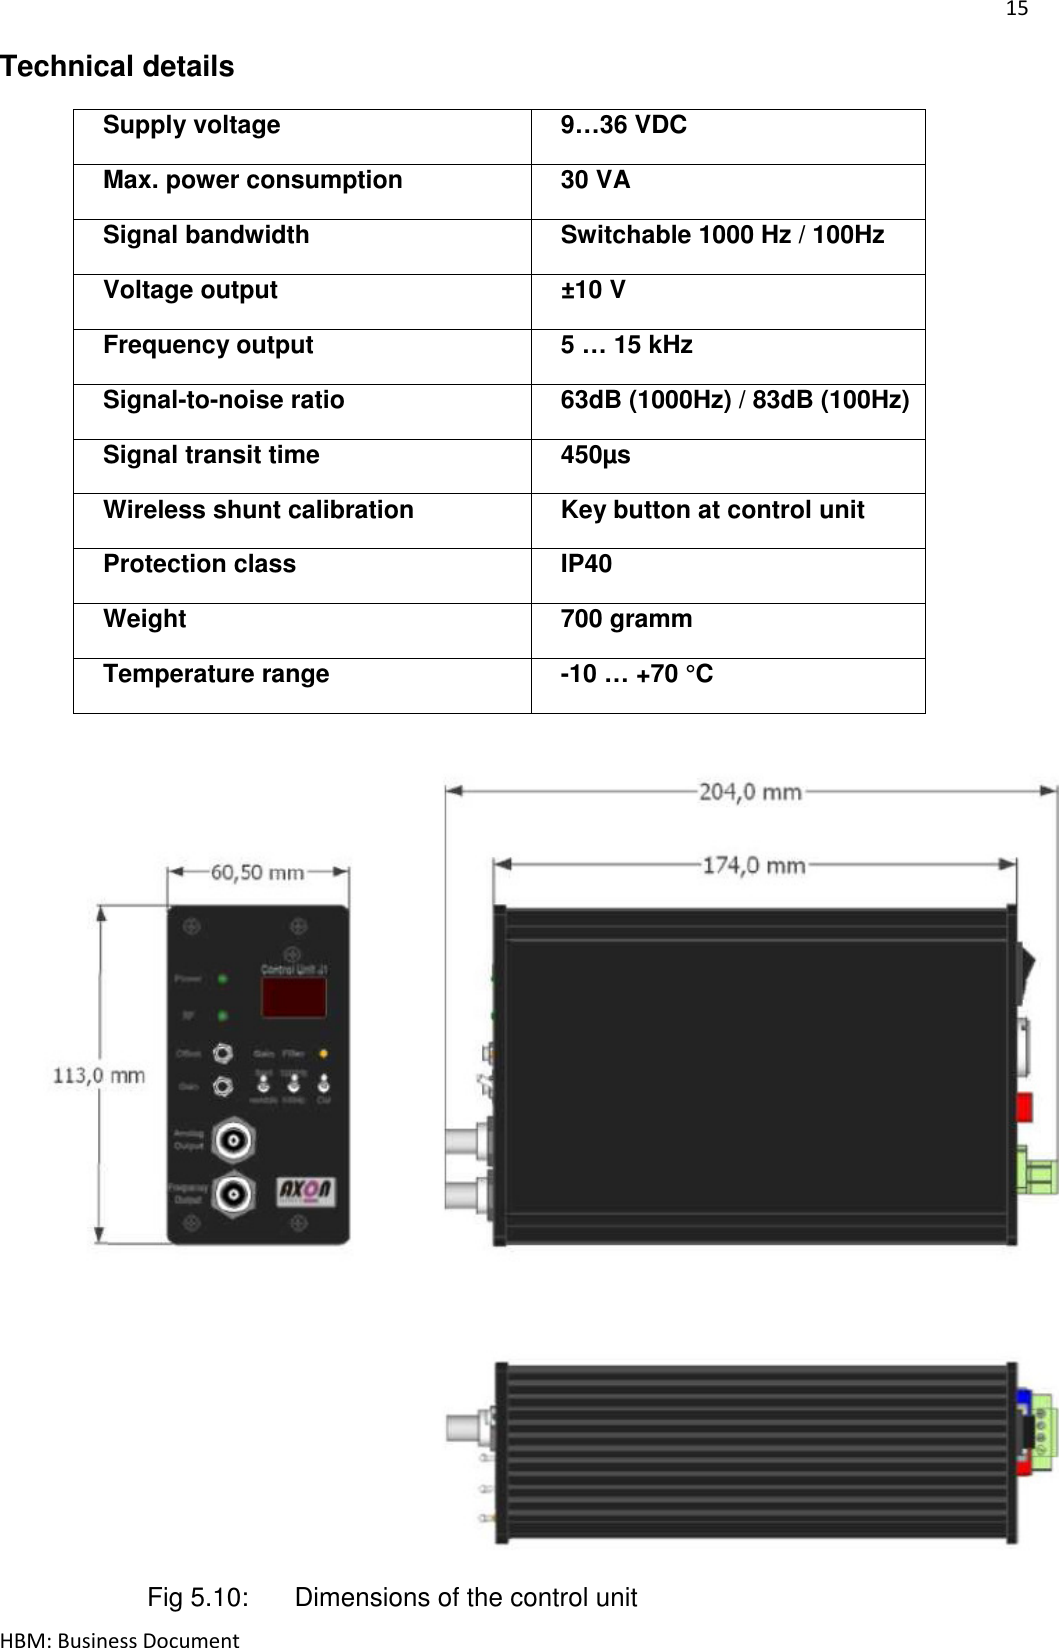 15  HBM: Business Document Technical details Supply voltage  9…36 VDC Max. power consumption  30 VA Signal bandwidth  Switchable 1000 Hz / 100Hz Voltage output  ±10 V Frequency output  5 … 15 kHz  Signal-to-noise ratio  63dB (1000Hz) / 83dB (100Hz) Signal transit time  450µs Wireless shunt calibration  Key button at control unit Protection class  IP40 Weight  700 gramm Temperature range  -10 … +70 °C     Fig 5.10:   Dimensions of the control unit    